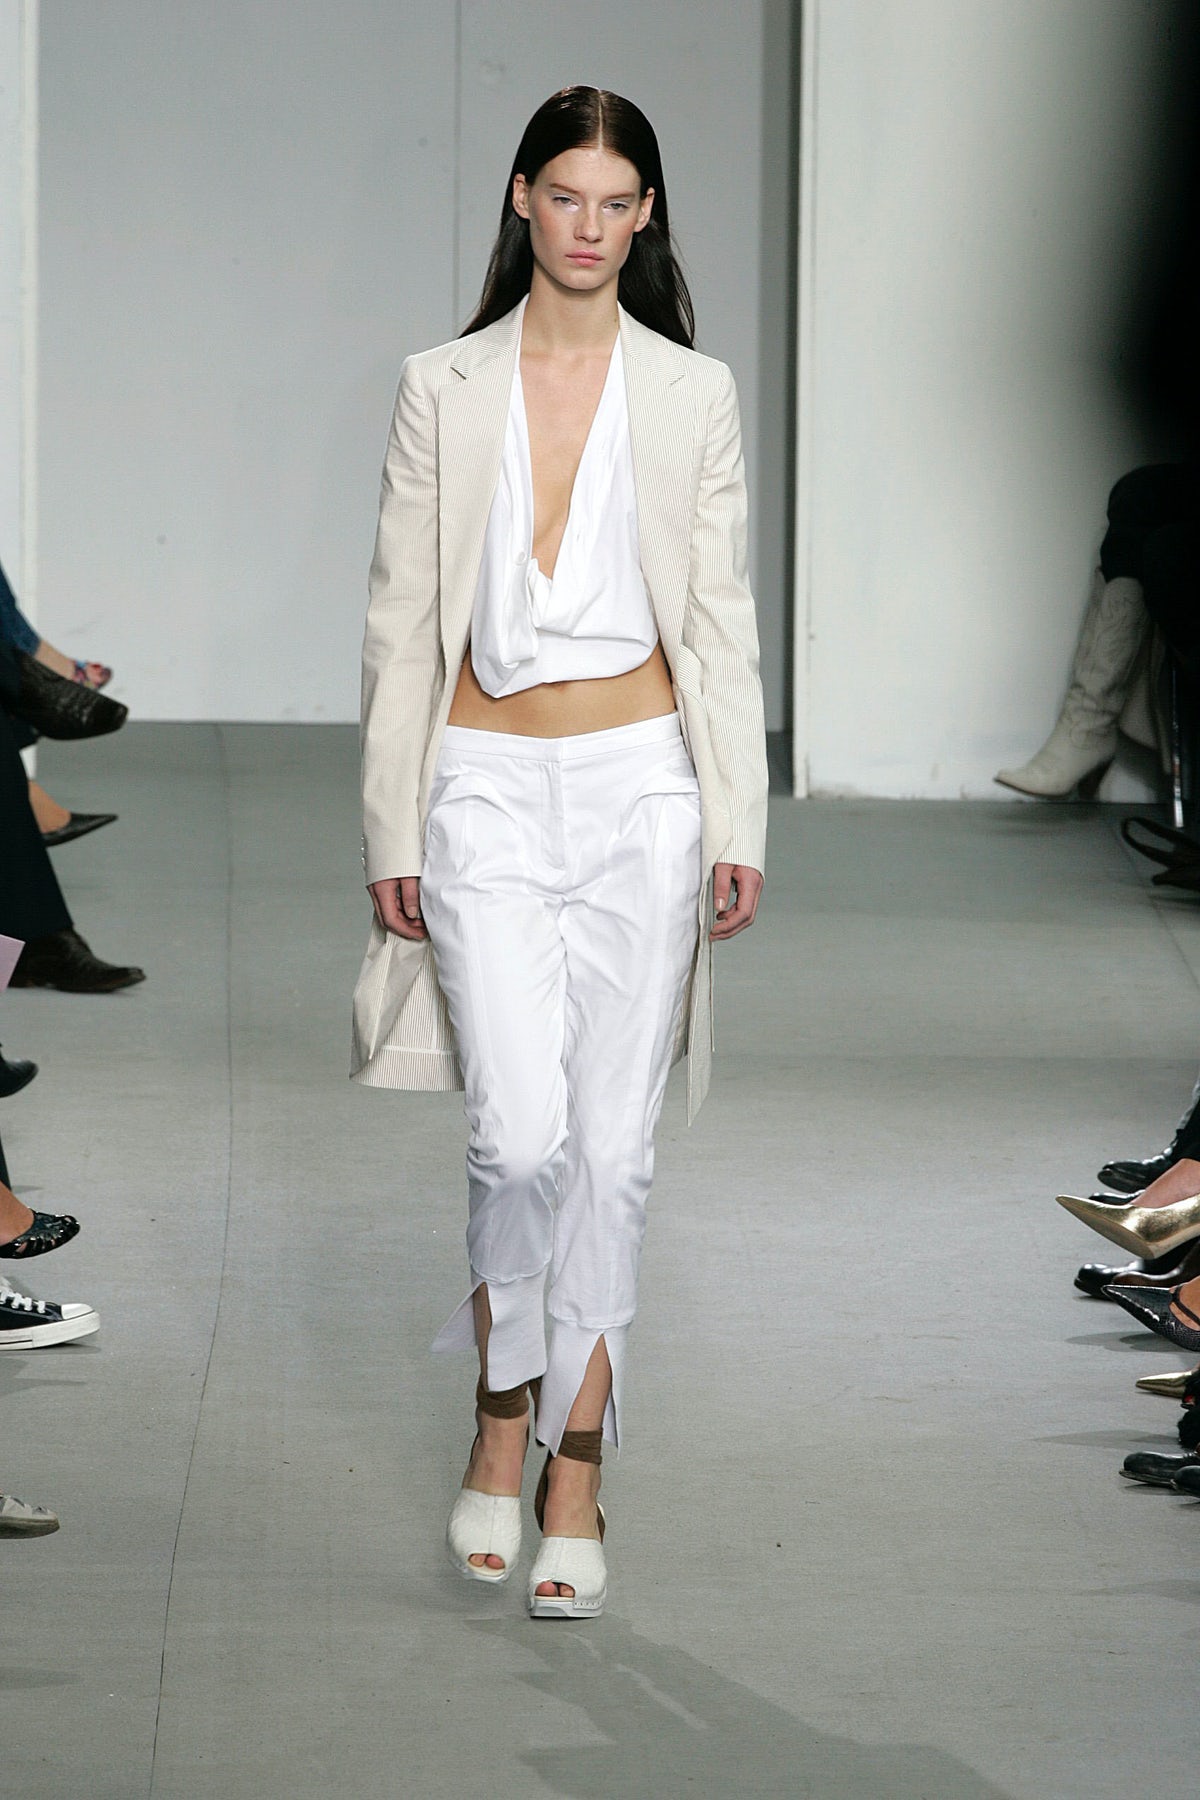 Helmut Lang Spring 1999 Ready-to-Wear collection, runway looks, beauty,  models, and reviews.